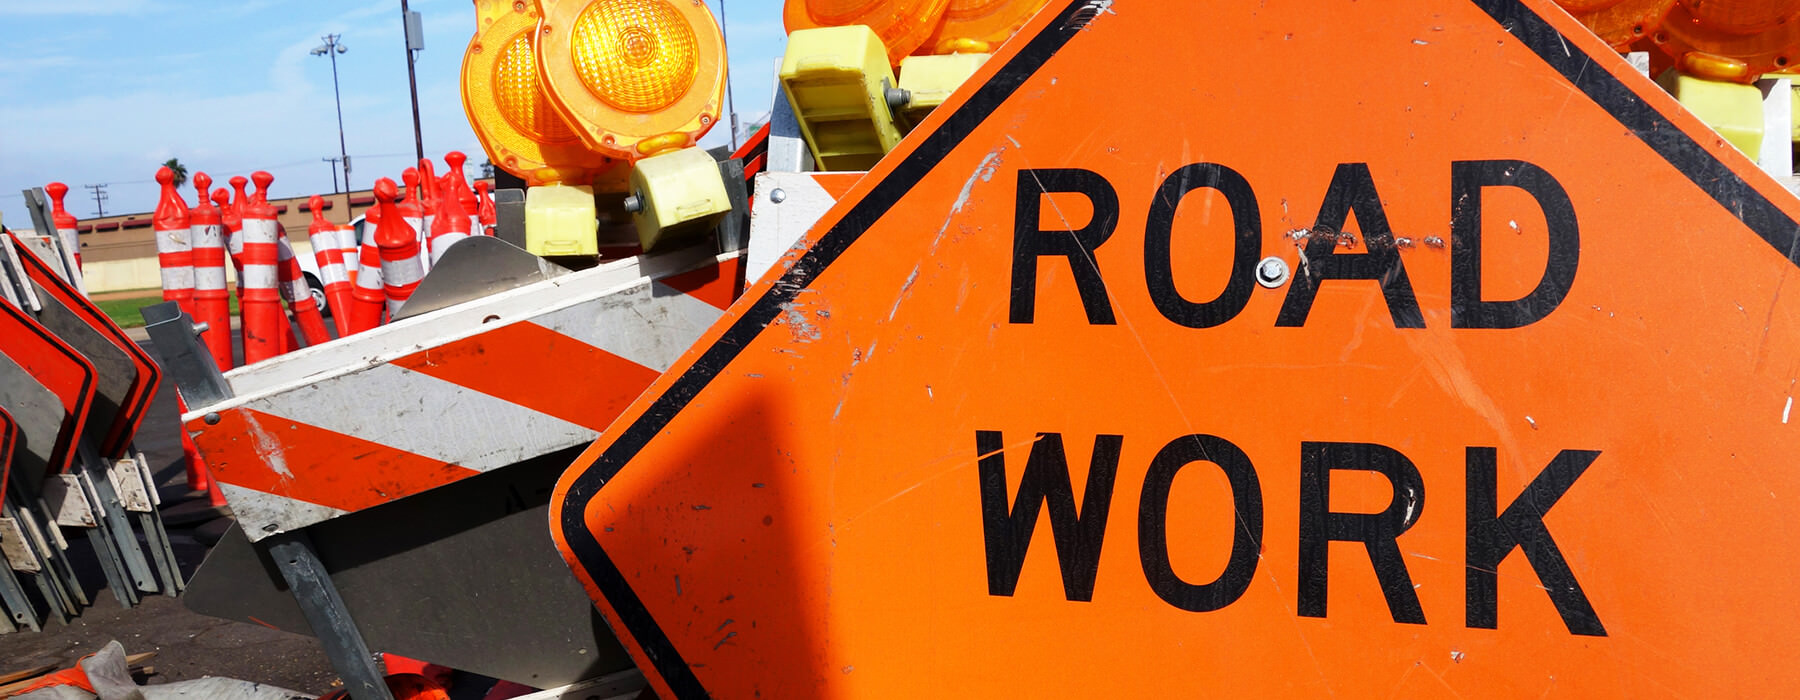 A road work sign with construction barricades.